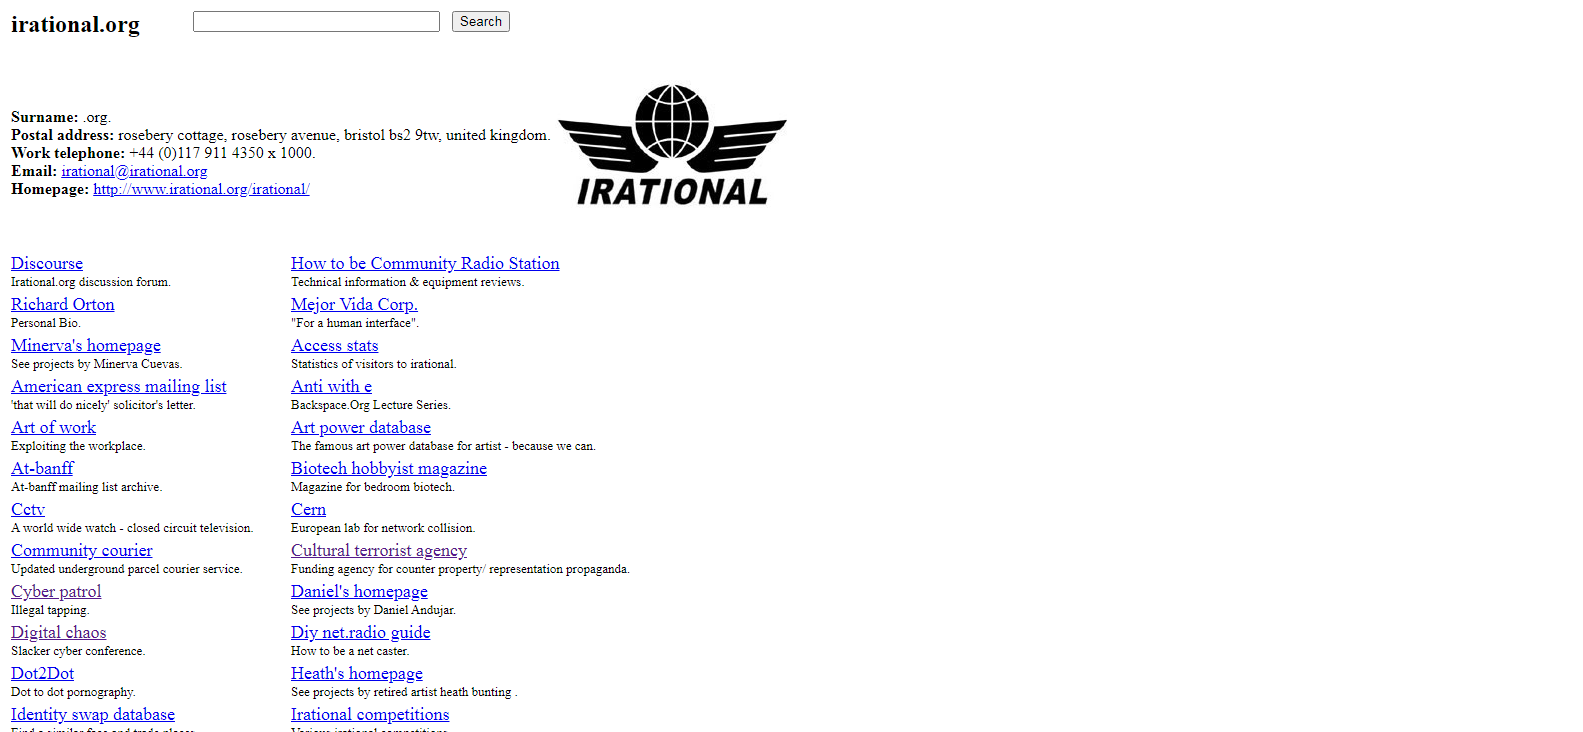 Irrational.org - works from as far back as 1995!